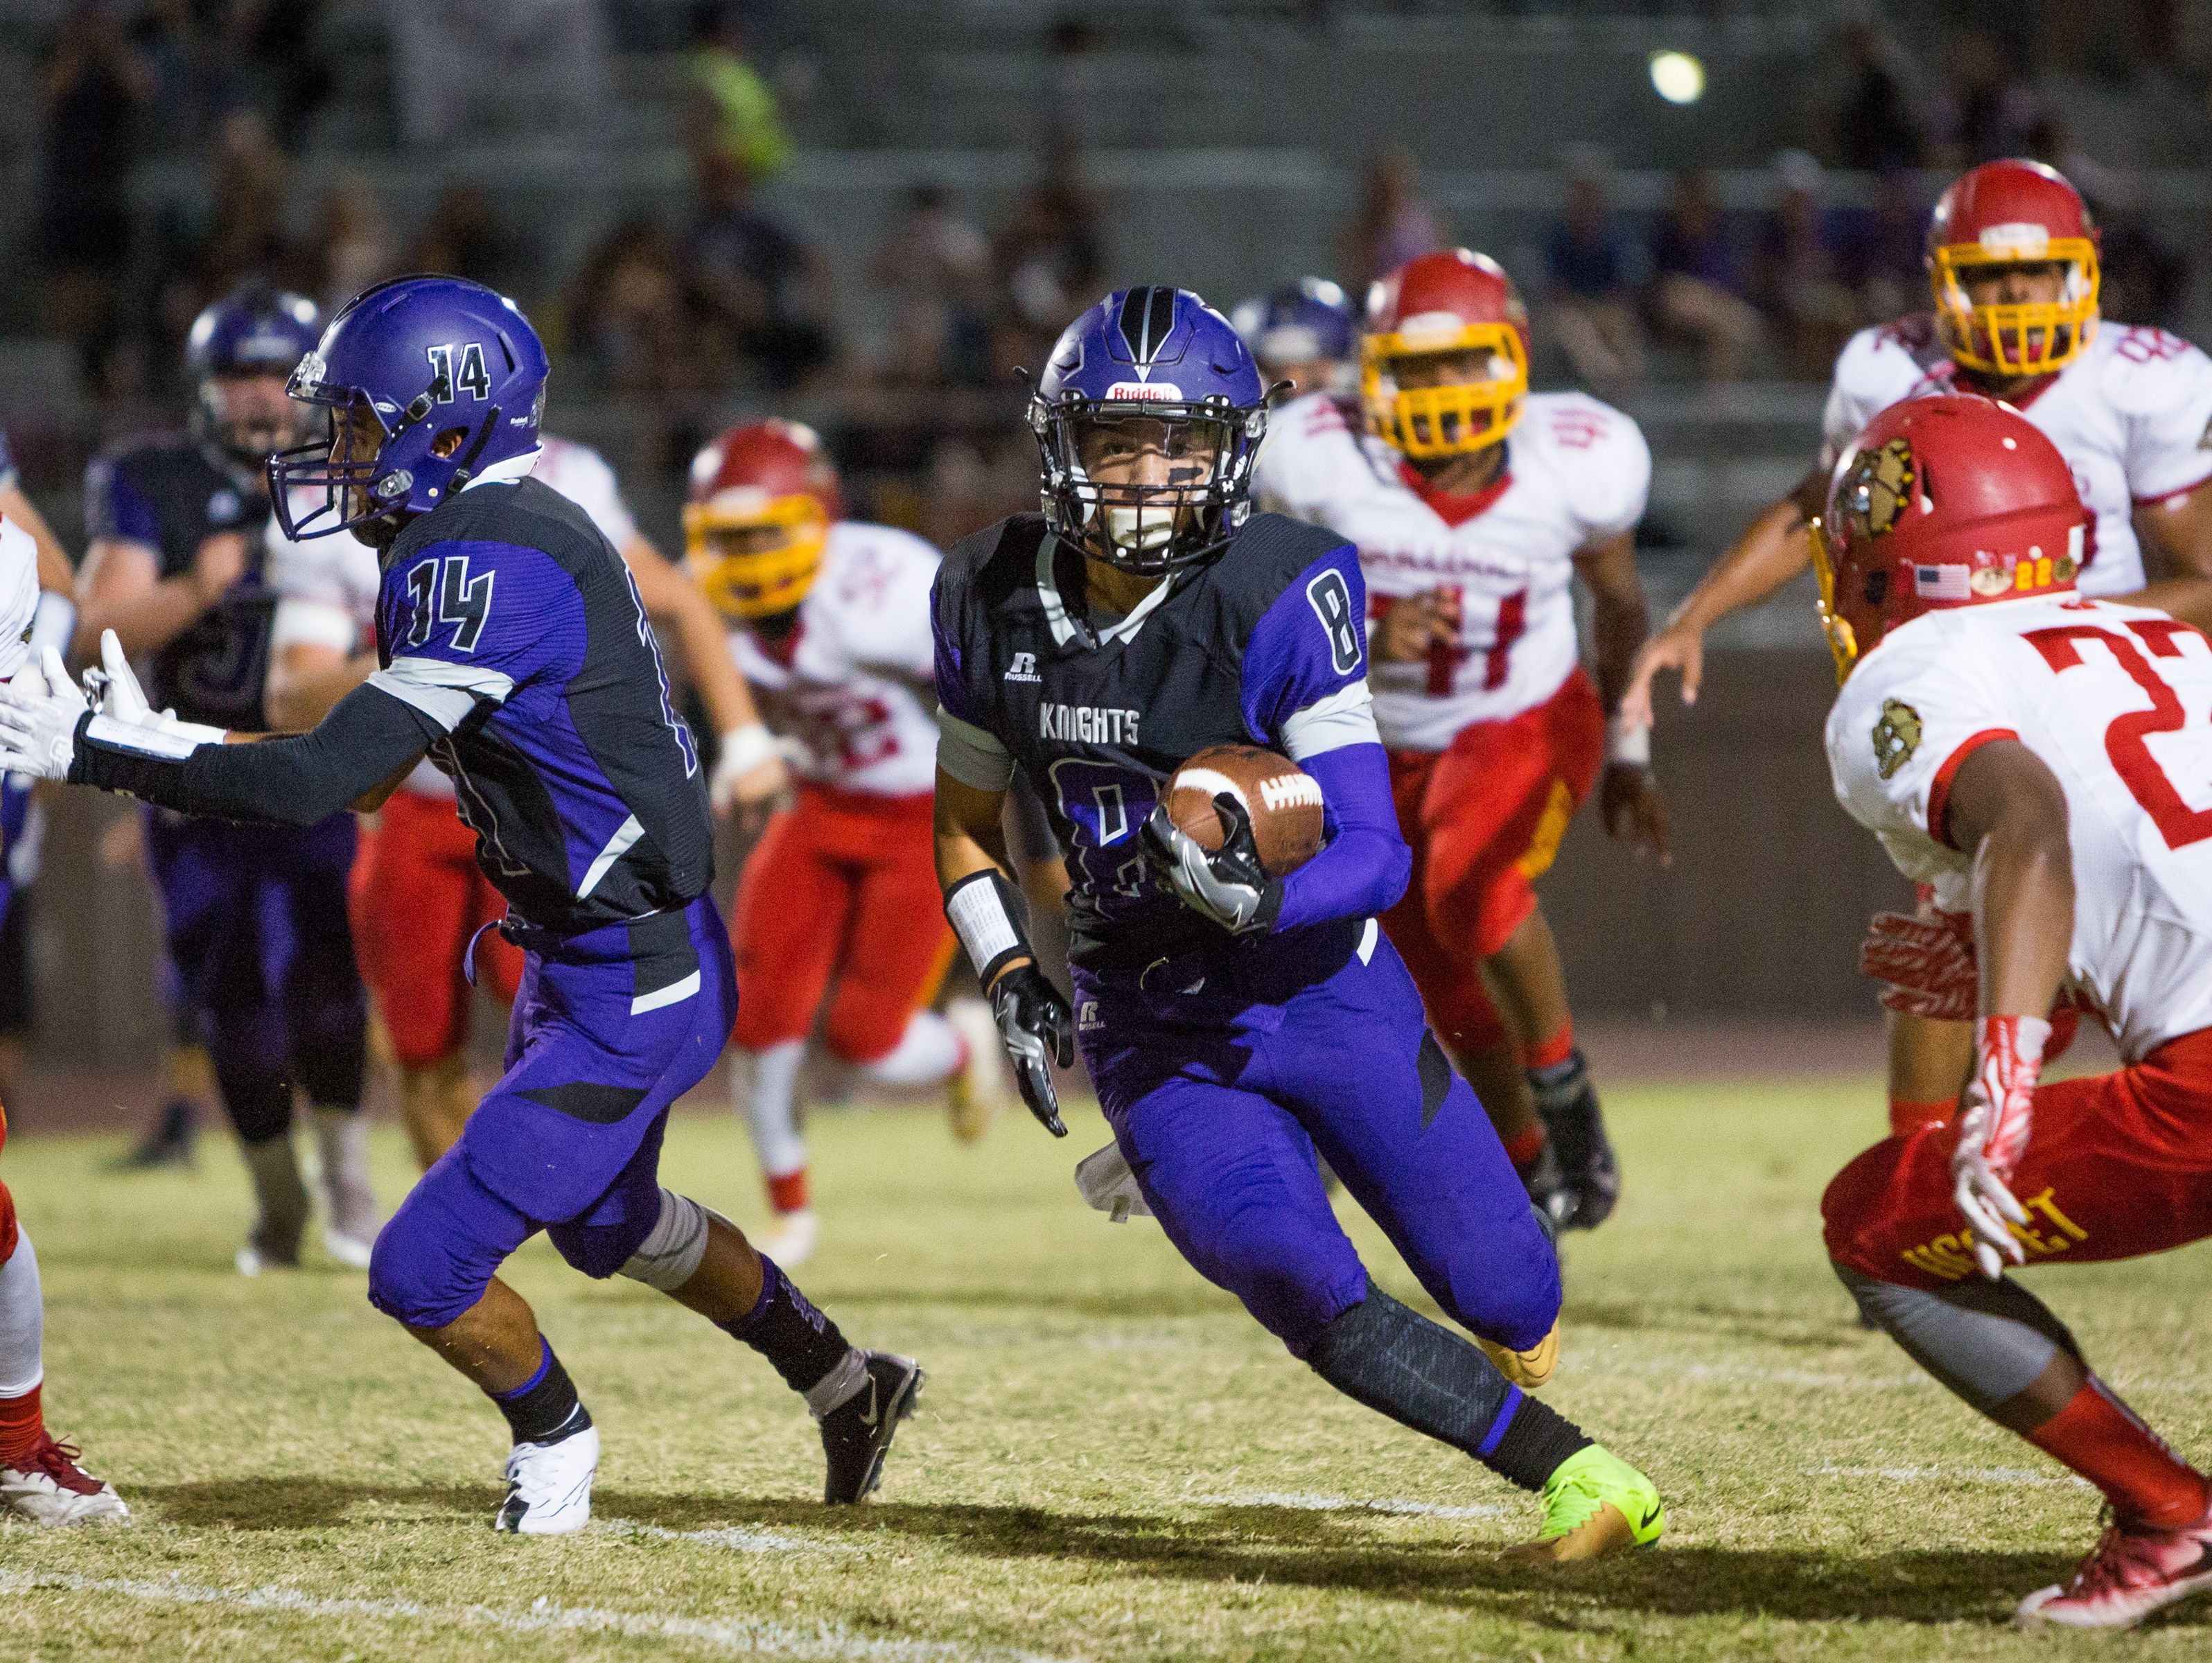 Kaleb Welmas (#8) runs the ball right down the middle for a Shadow Hills first down.